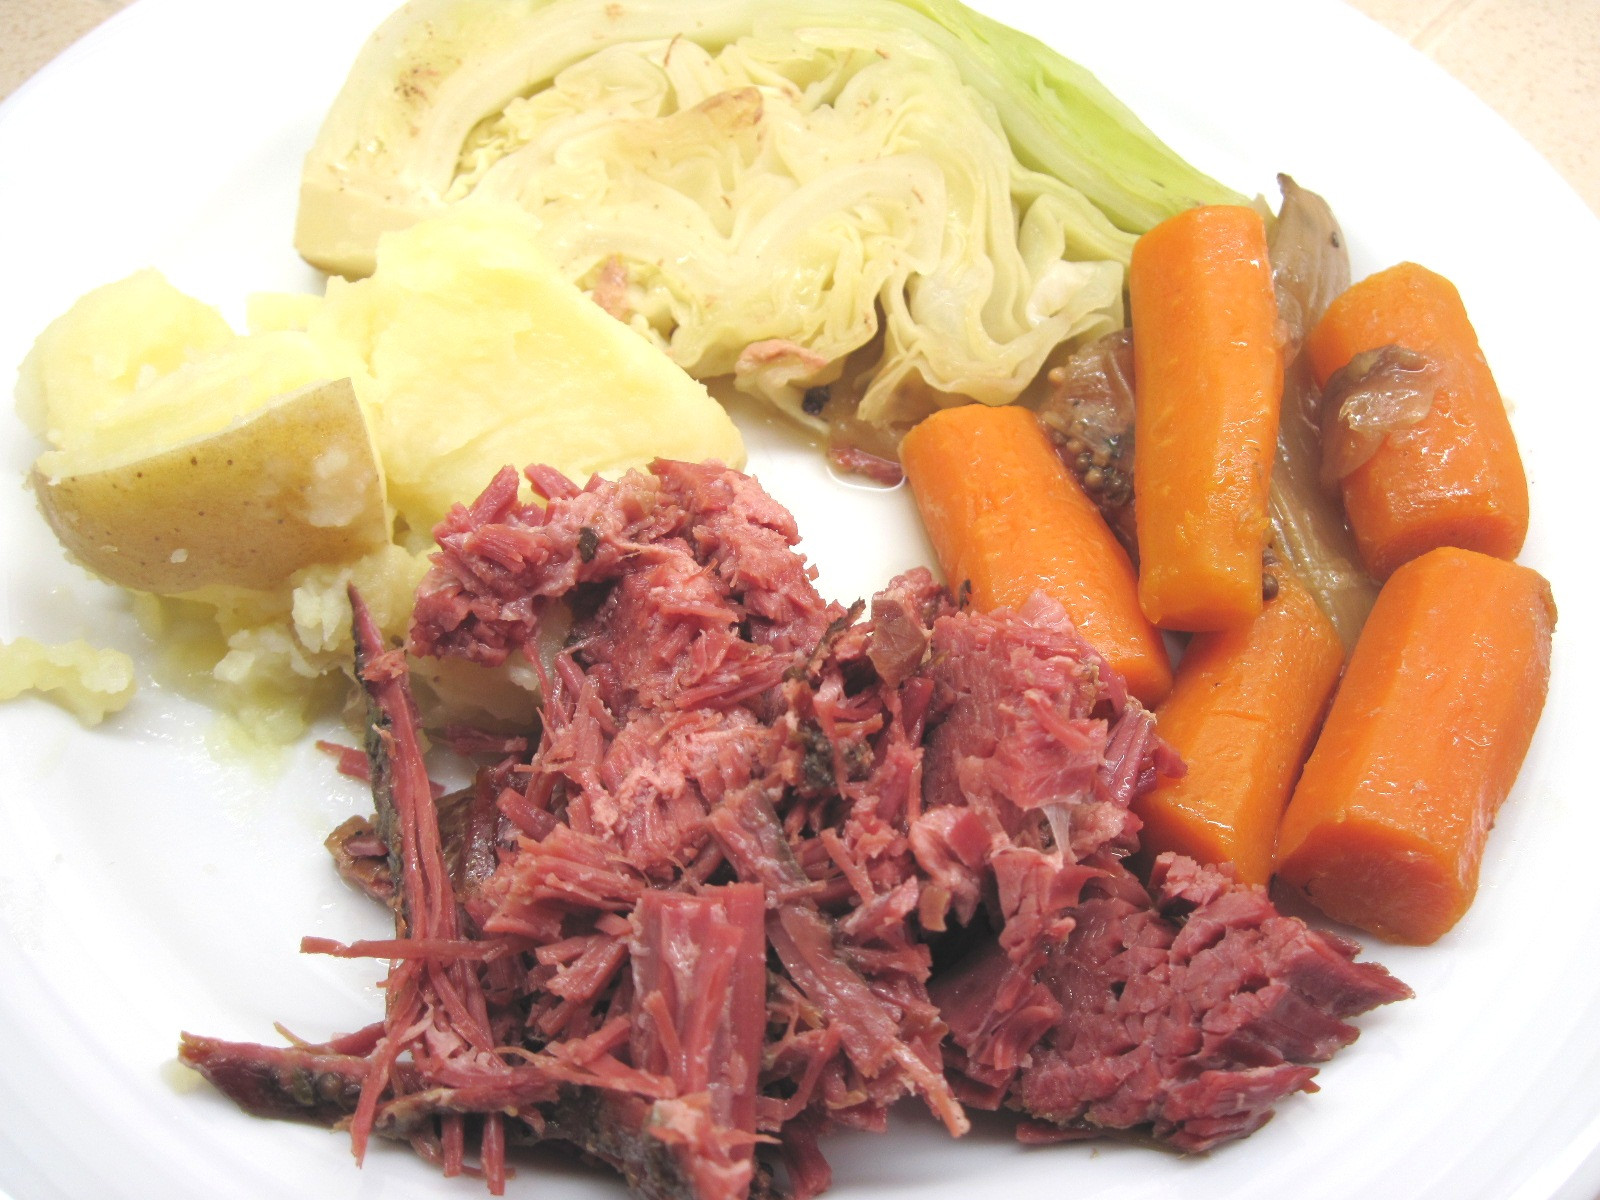 St Patrick Day Corned Beef And Cabbage
 St Patrick’s Day Corned Beef Dinner